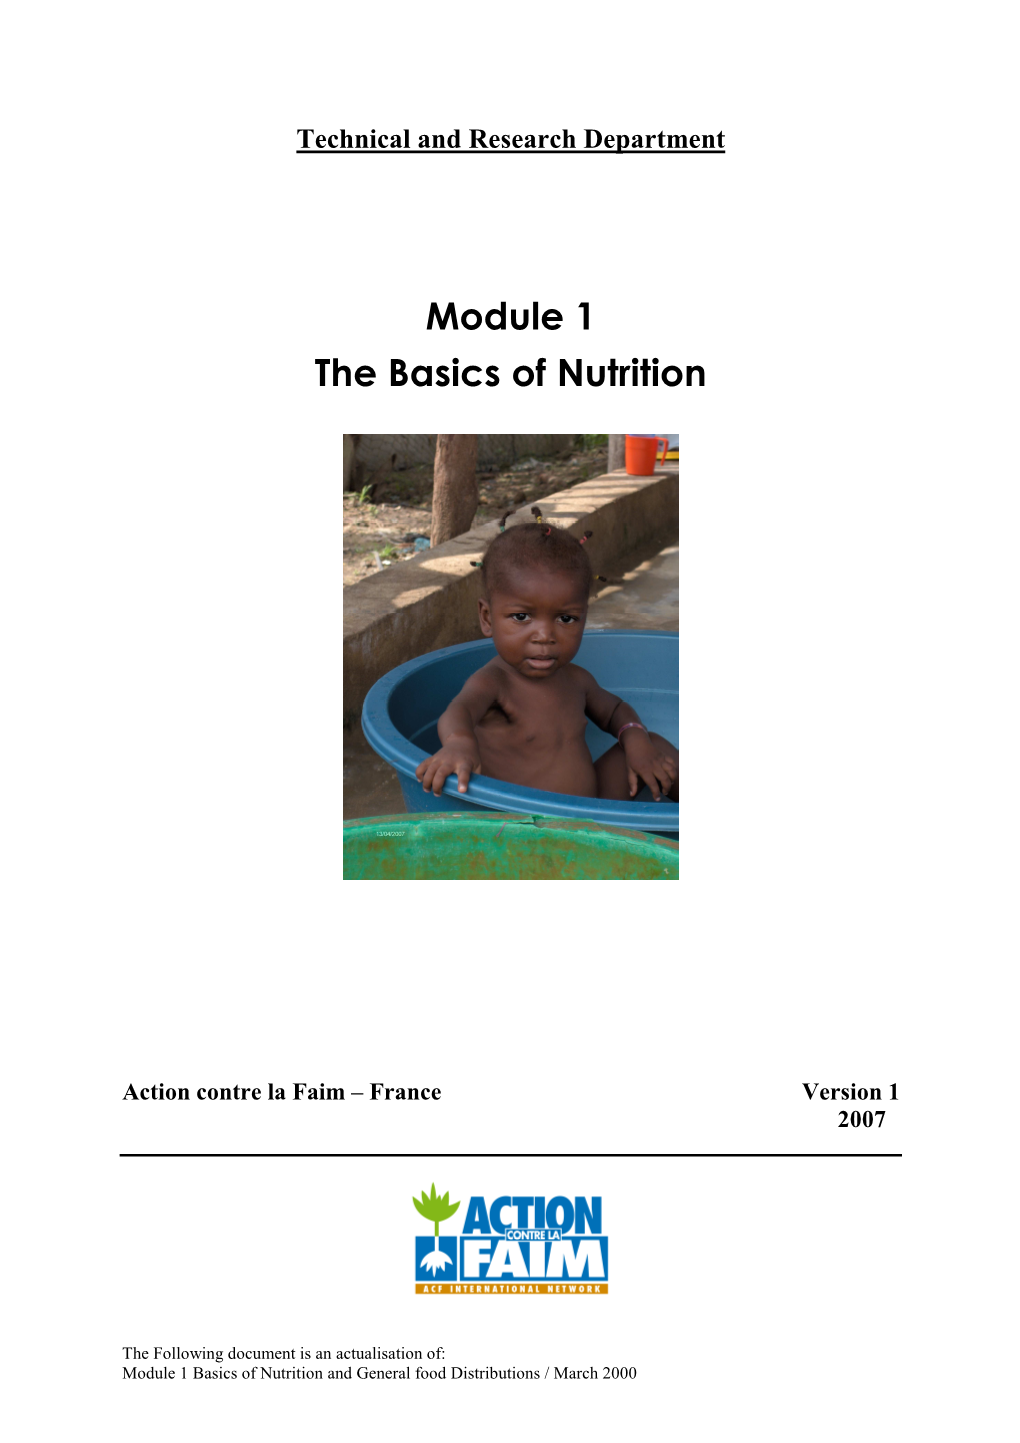 Version 1 Module the Basics of Nutrition 2007